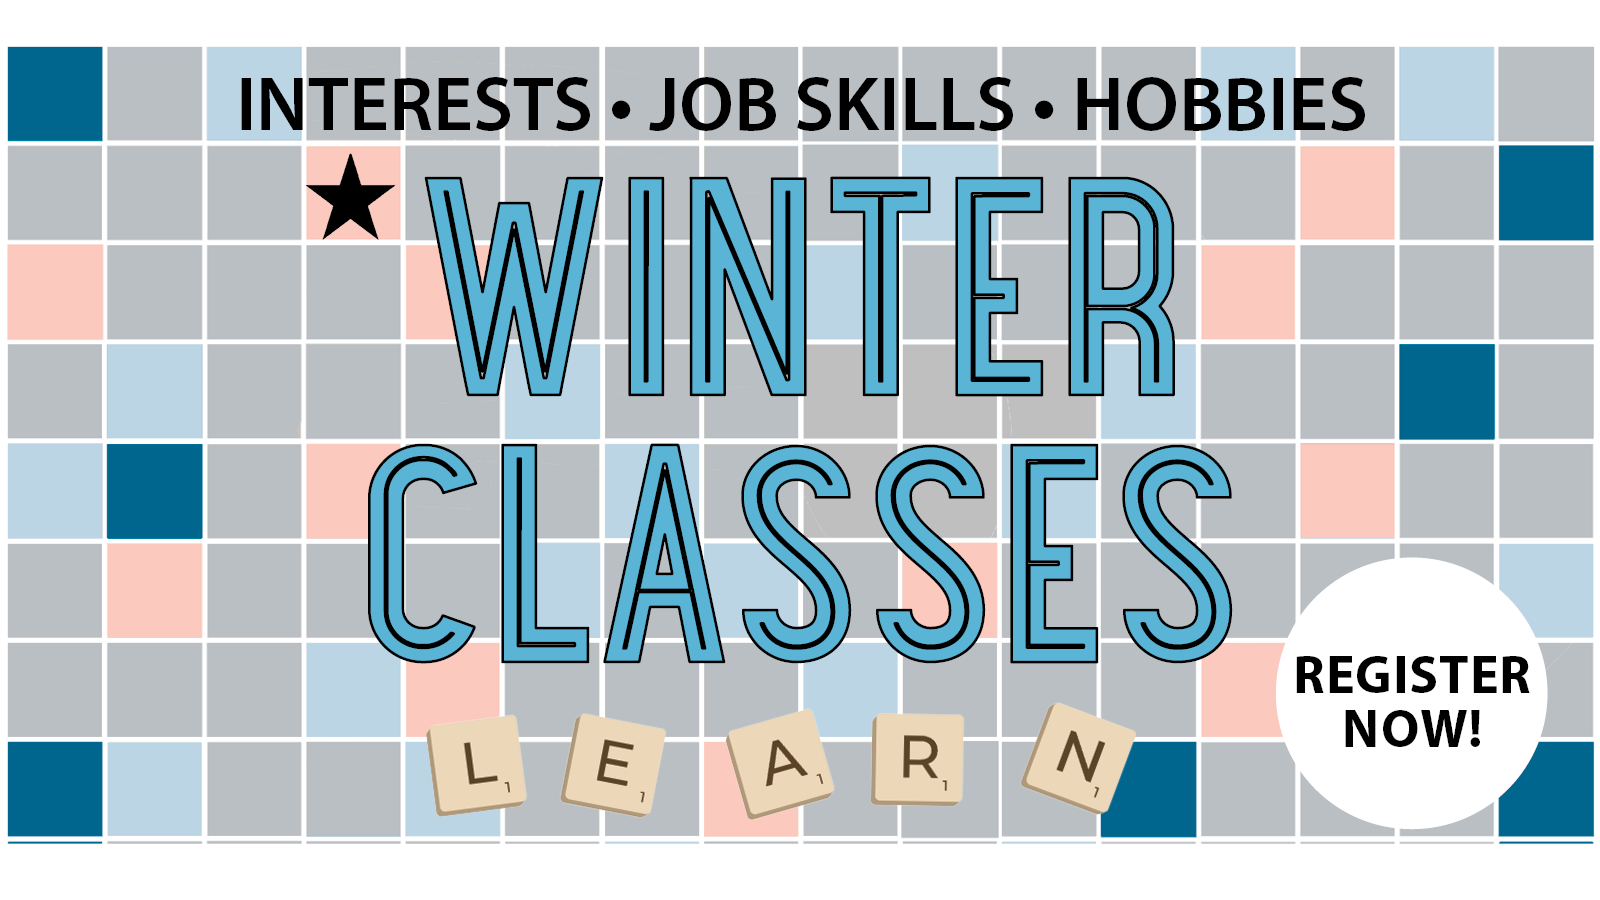 Winter Classes - interests, job skills, hobbies - register now! - background is a Scrabble game board with squares in either grey, dark blue, light blue or pink